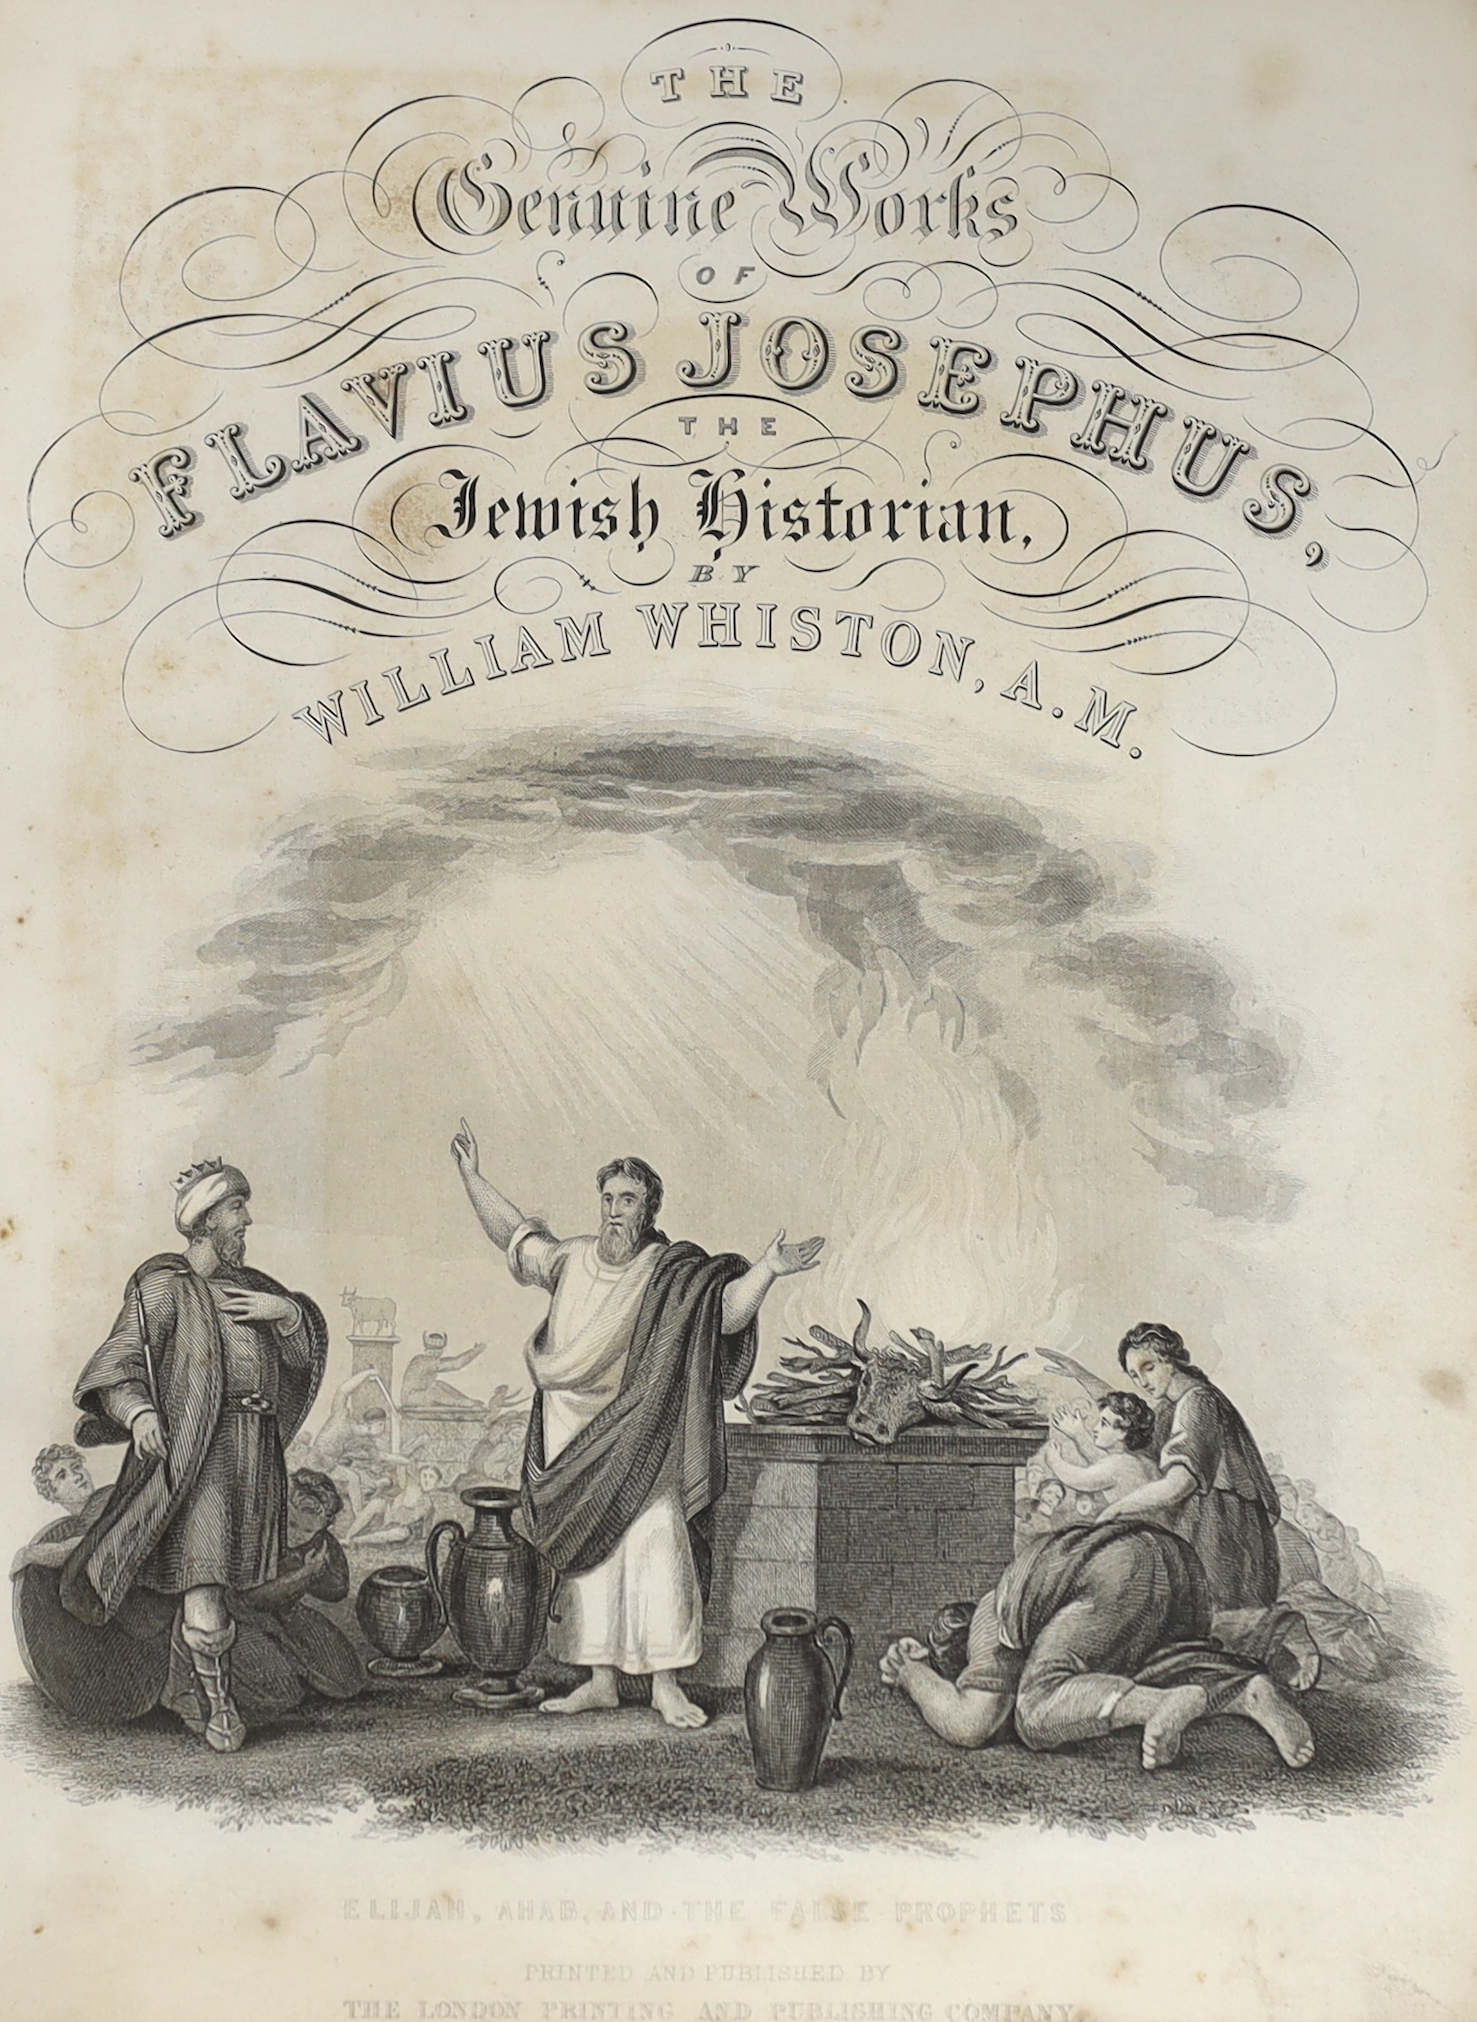 Josephus, Flavius - The Complete Works of ....comprising the Antiquities of the Jews, a History of the Jewish Wars....Translated by William Whiston....With a sequel continued to the present time. engraved pictorial and p